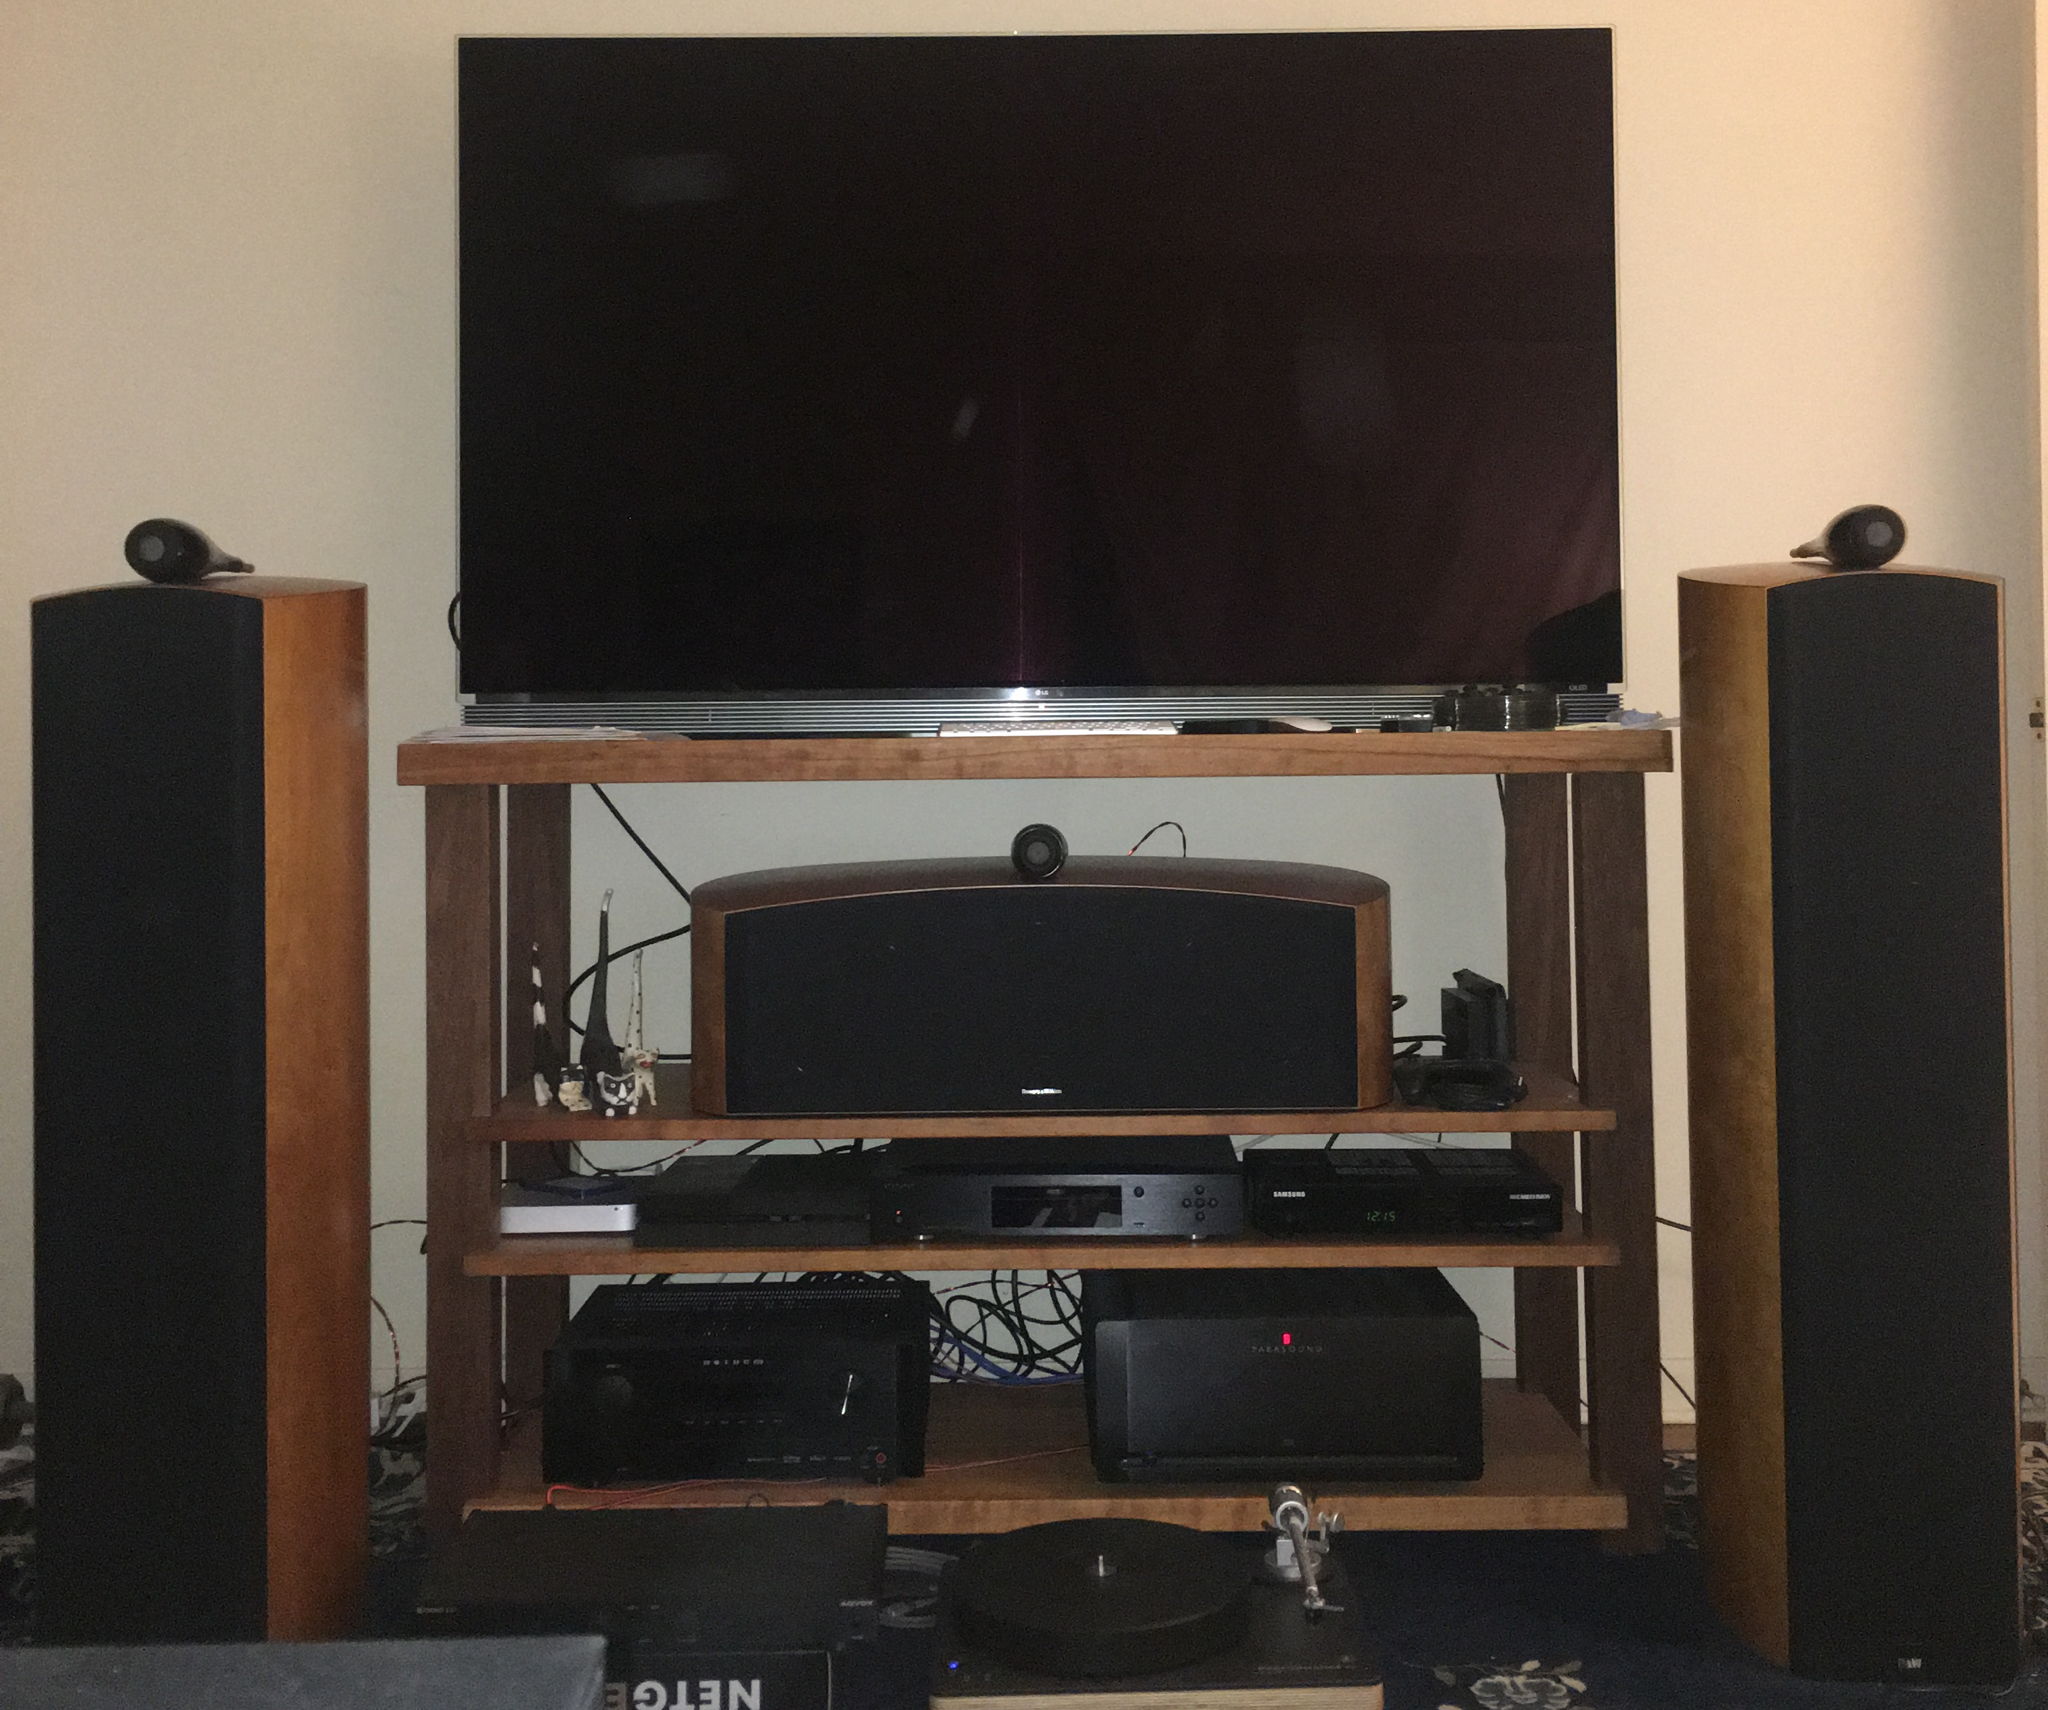 Terrible photo of the current setup